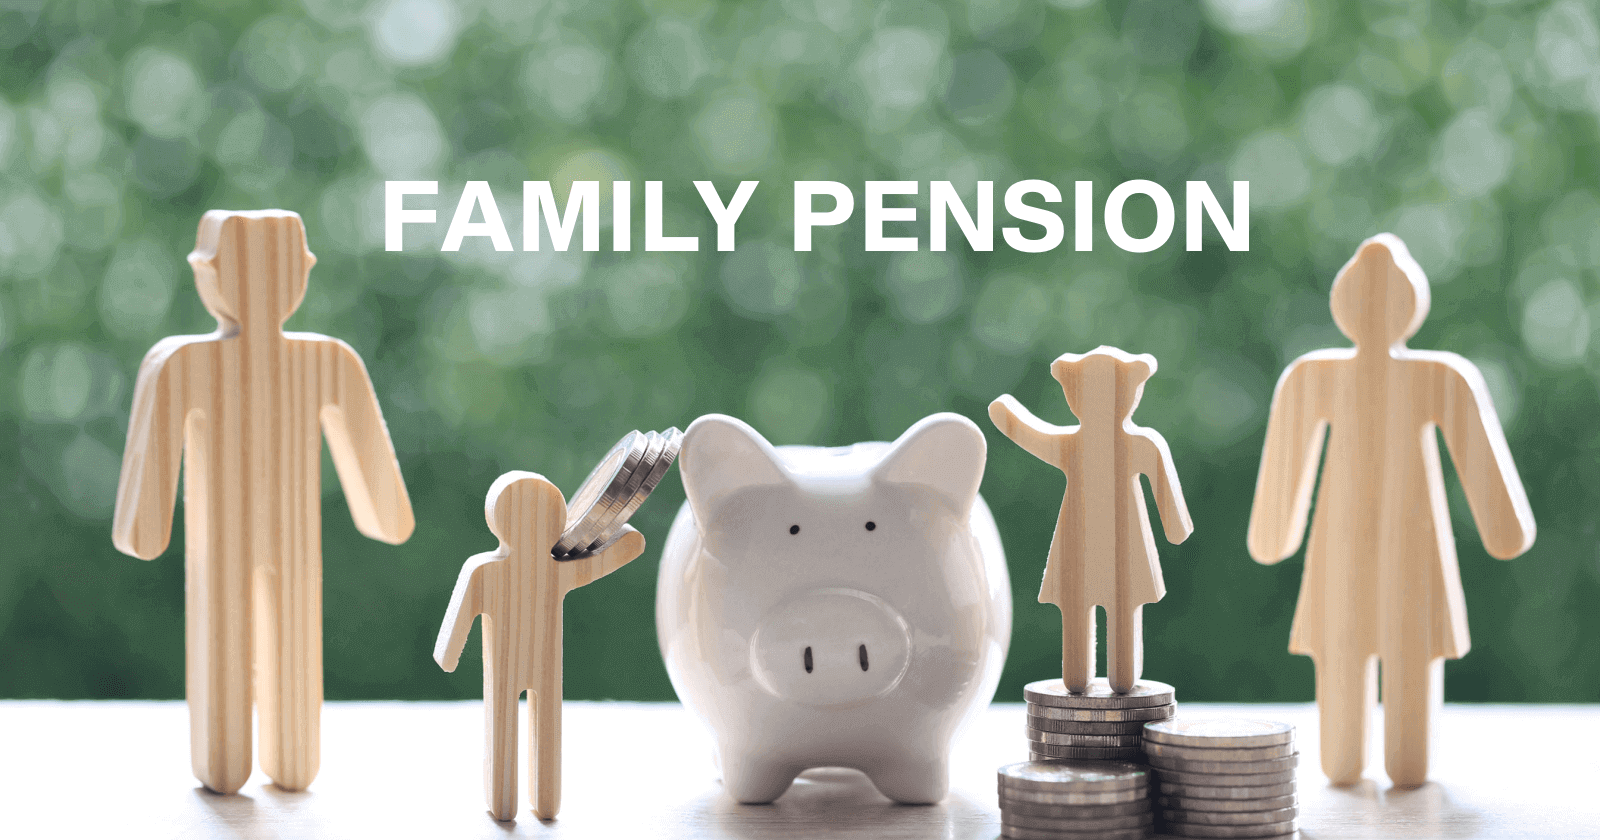 Commencement of Family Pension with Rs. 16 lakh arrear of unmarried daughter after 06 years of parent’s death - Success story of CPENGRAMS portal